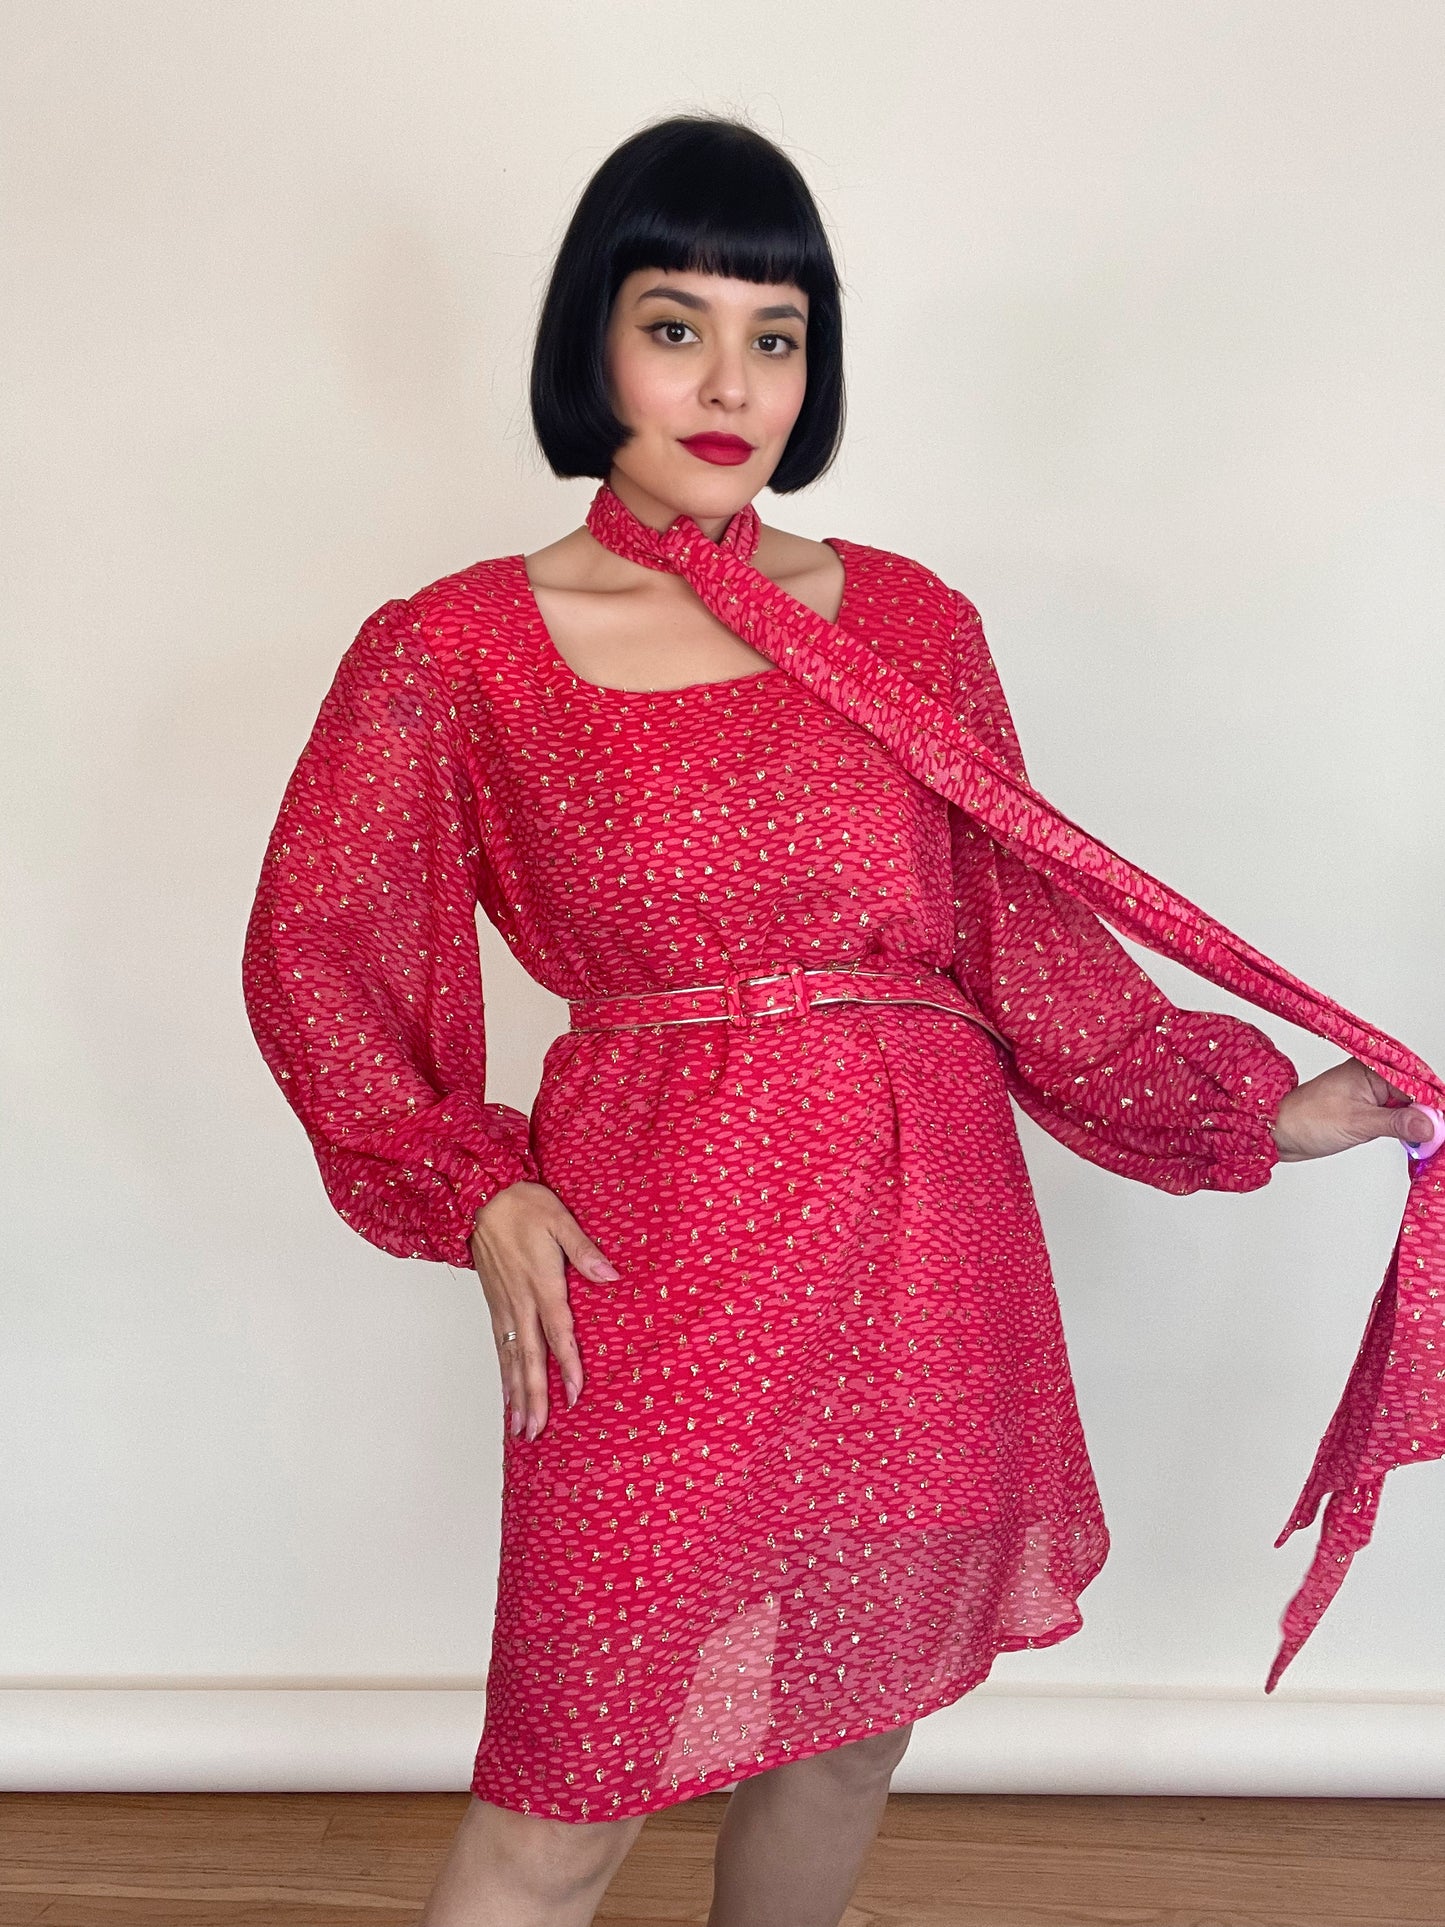 Vintage 60s "Patricia's Santa Ana" Dark Pink/ Red and Gold Long Sleeve Shift Dress Best Fits Sizes S-M